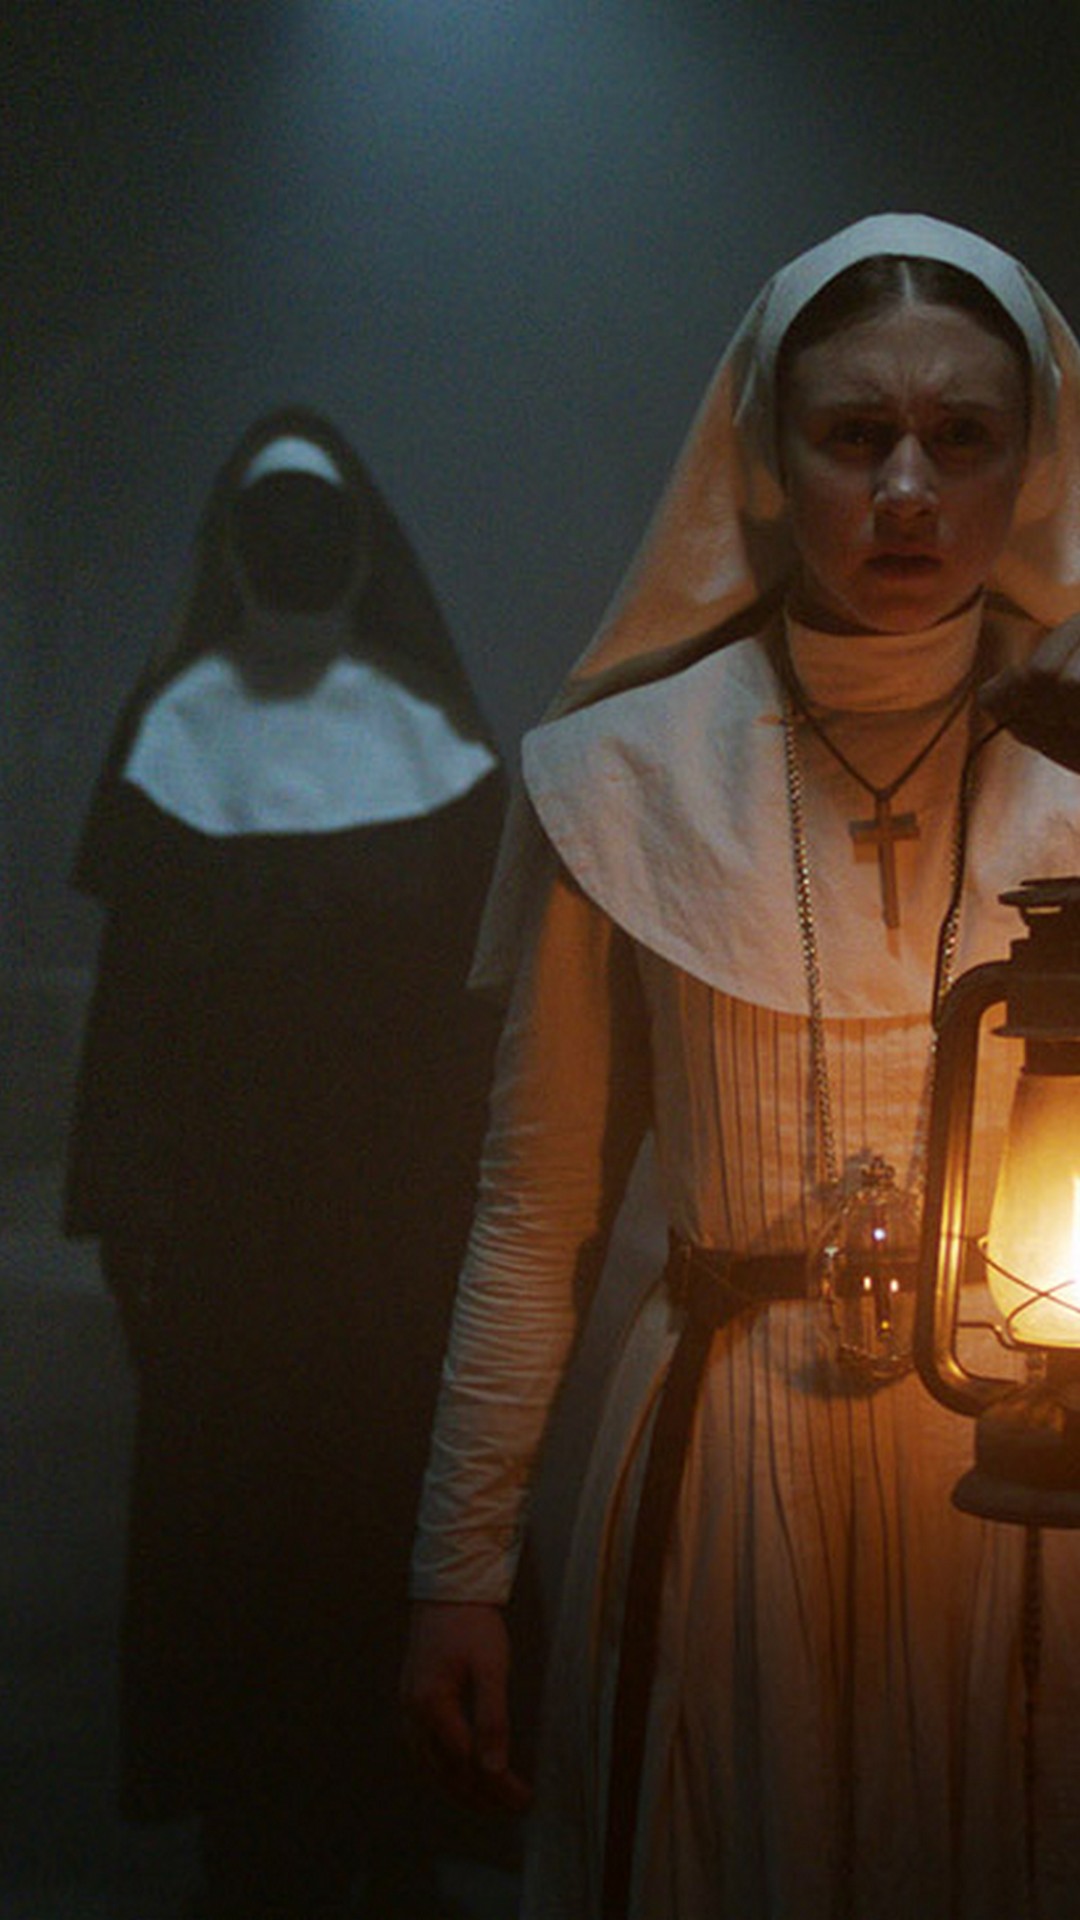 Android Wallpaper The Nun with image resolution 1080x1920 pixel. You can make this wallpaper for your Android backgrounds, Tablet, Smartphones Screensavers and Mobile Phone Lock Screen